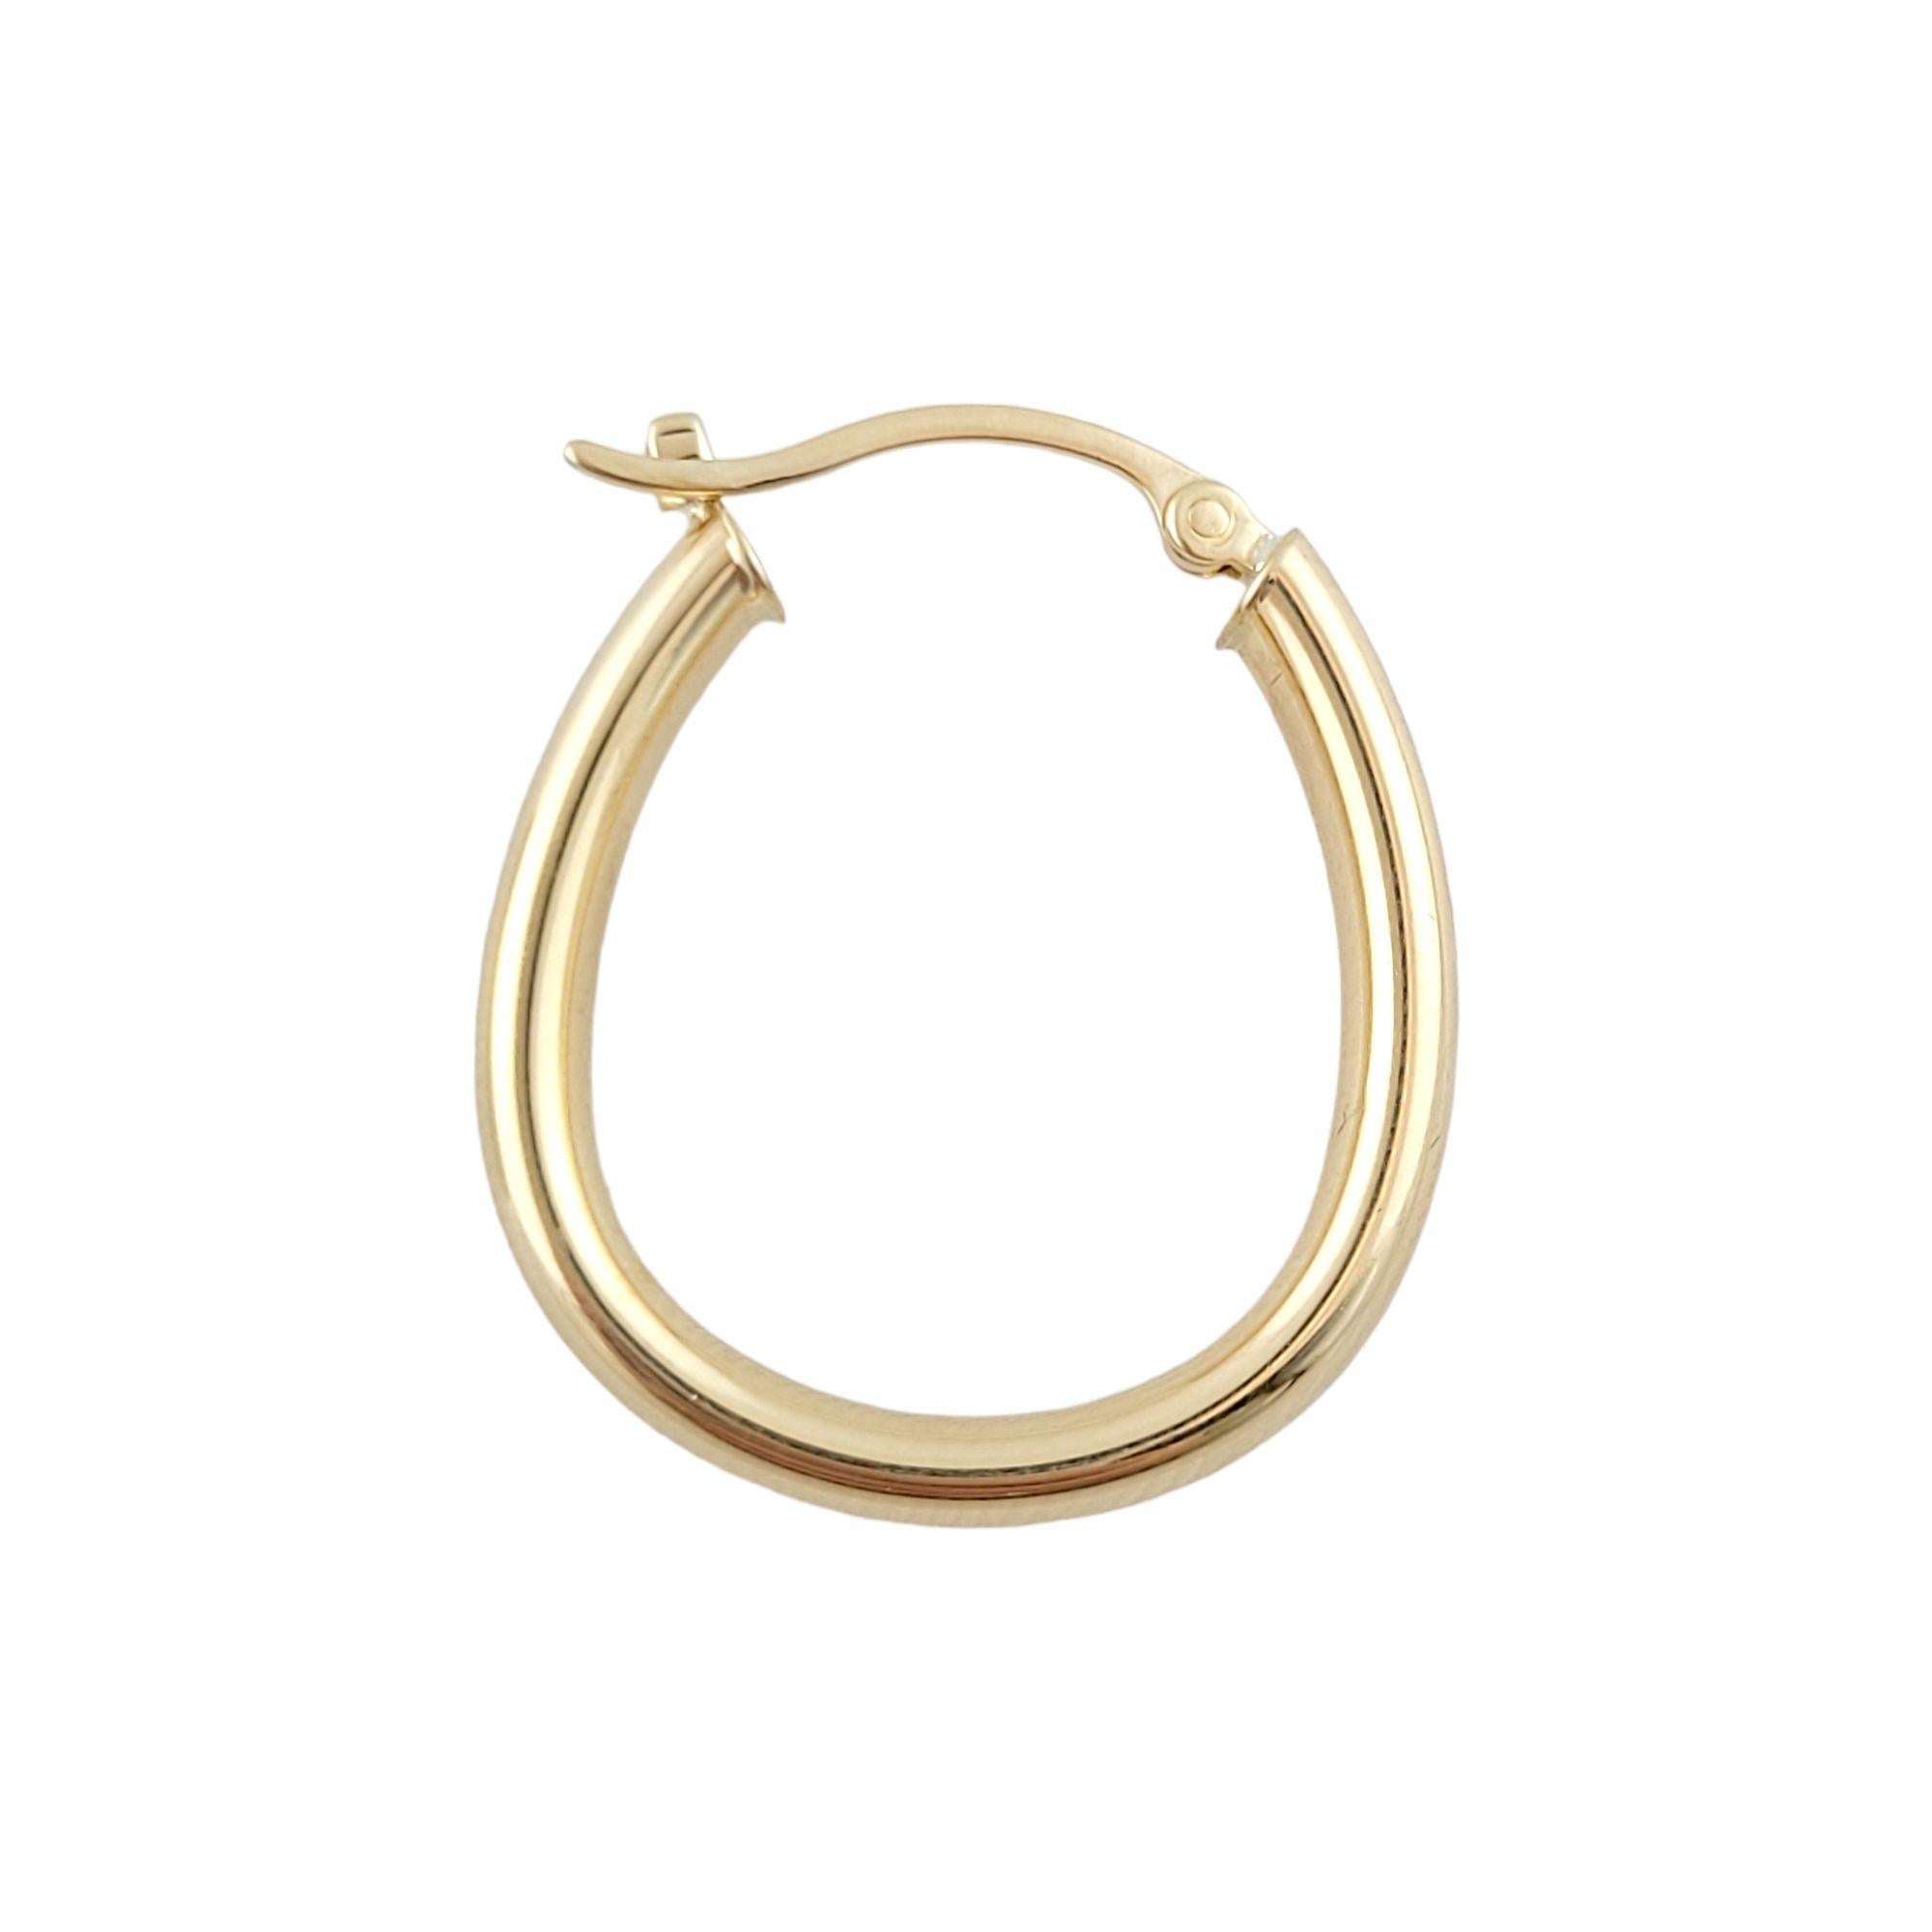 This gorgeous set of 14K gold oval hoops will look great on anyone!

Size: 23mm X 20mm X 4mm

Weight: 1.7 g/ 0.9 dwt

Hallmark: CARLA 14K

Very good condition, professionally polished.

Will come packaged in a gift box or pouch (when possible) and